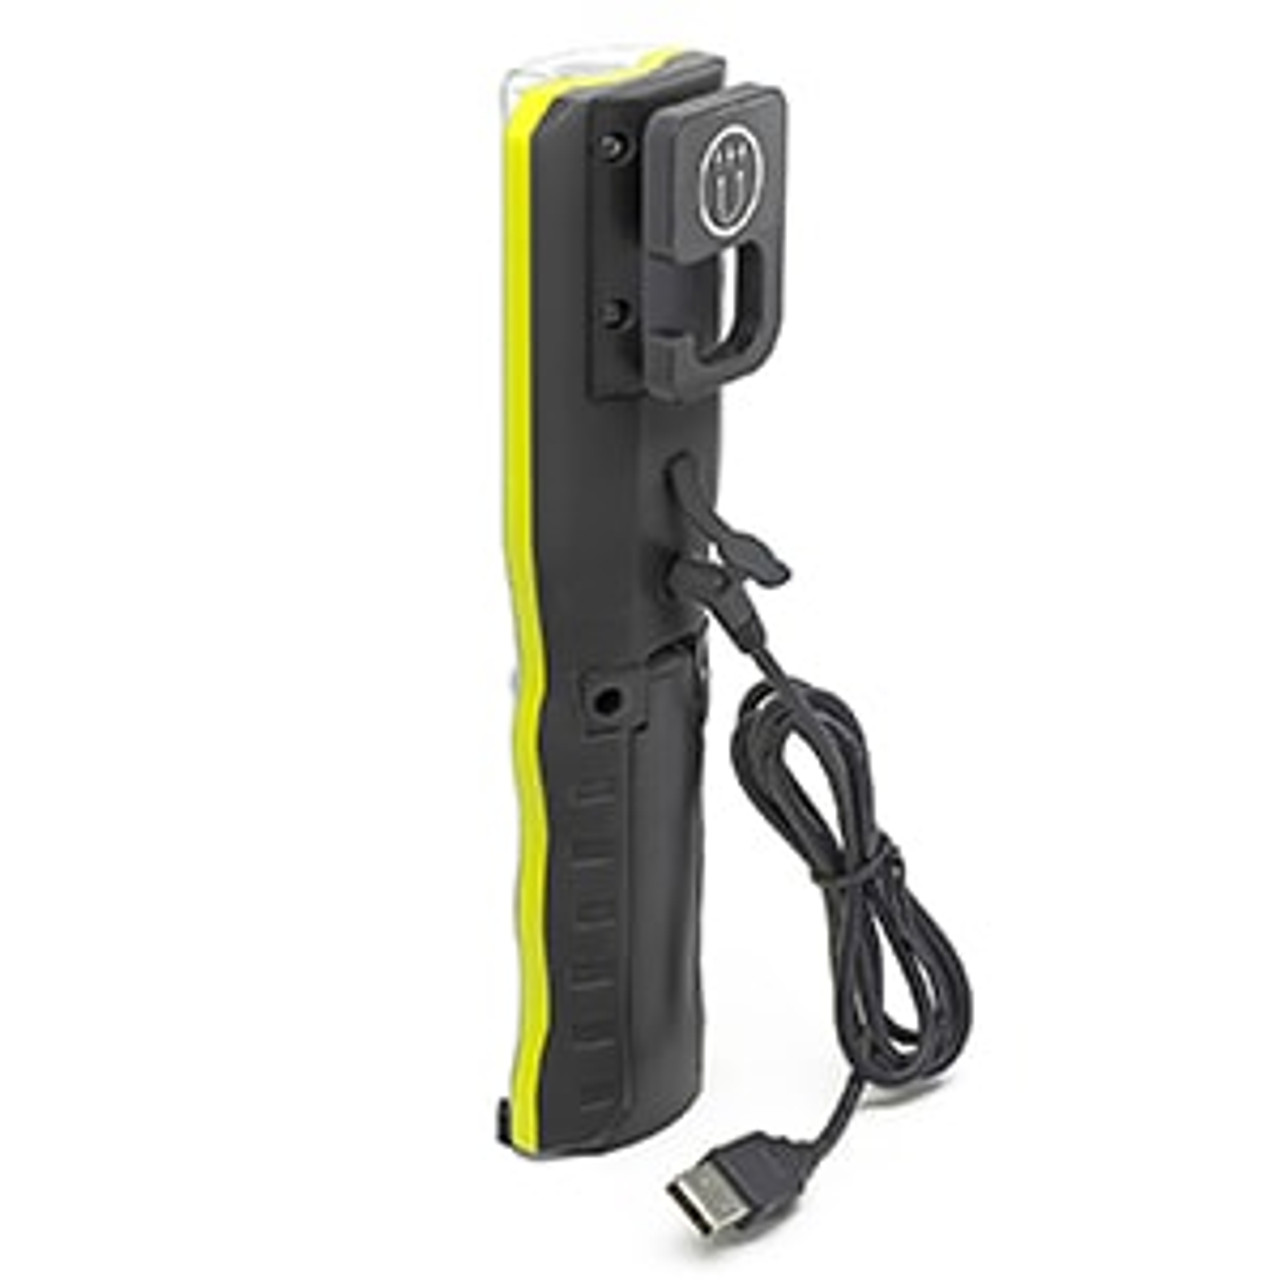 Unilite Signal Light and Torch IL-SIG1 - USB rechargeable.